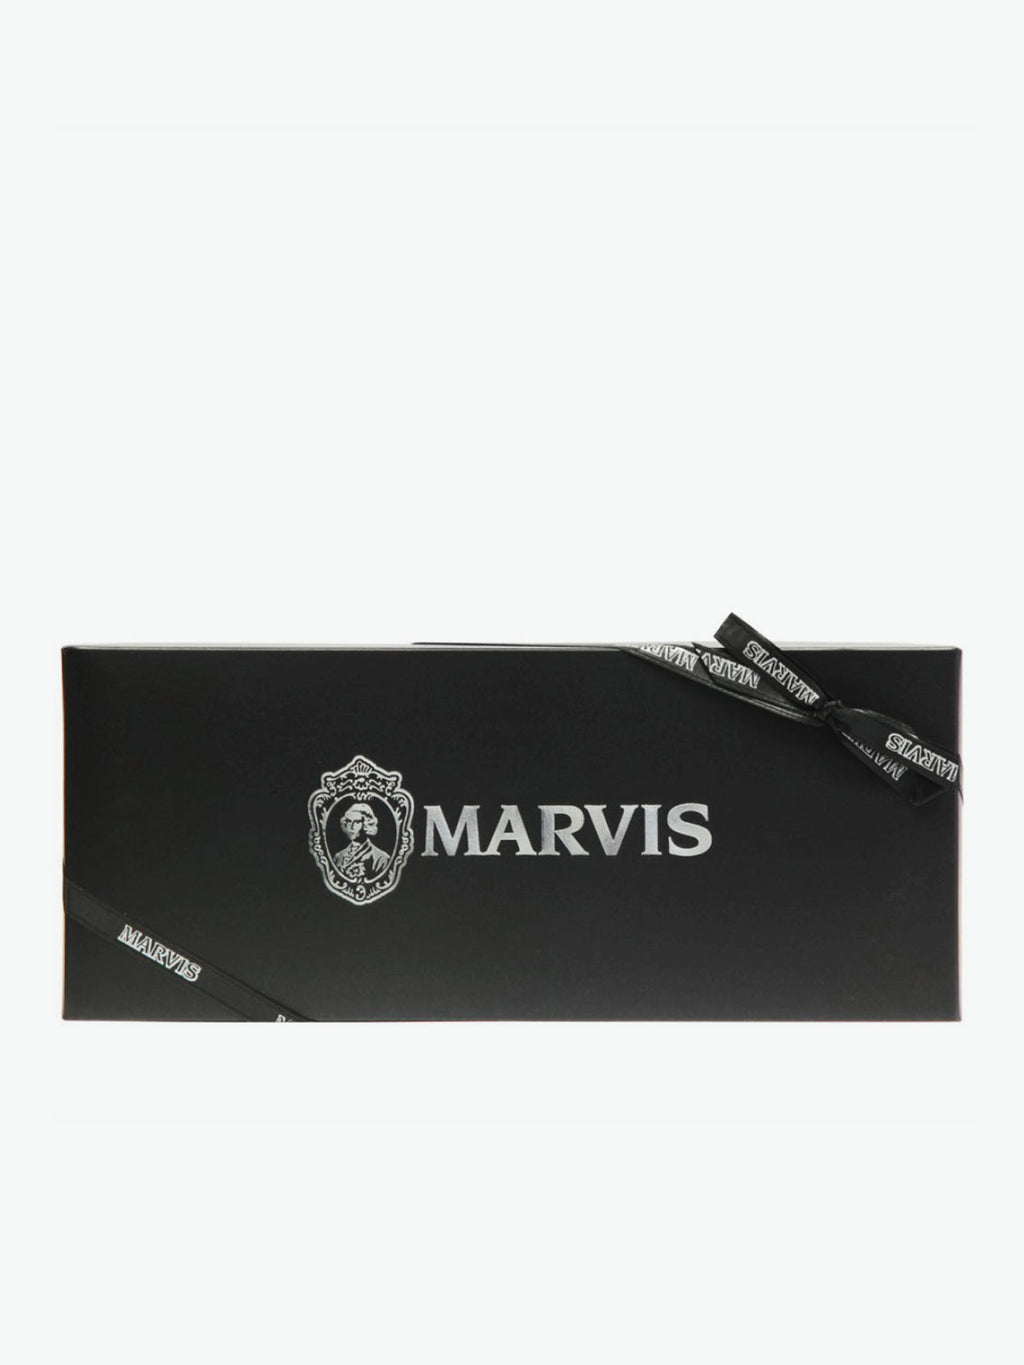 Marvis Toothpaste Black Box Collection